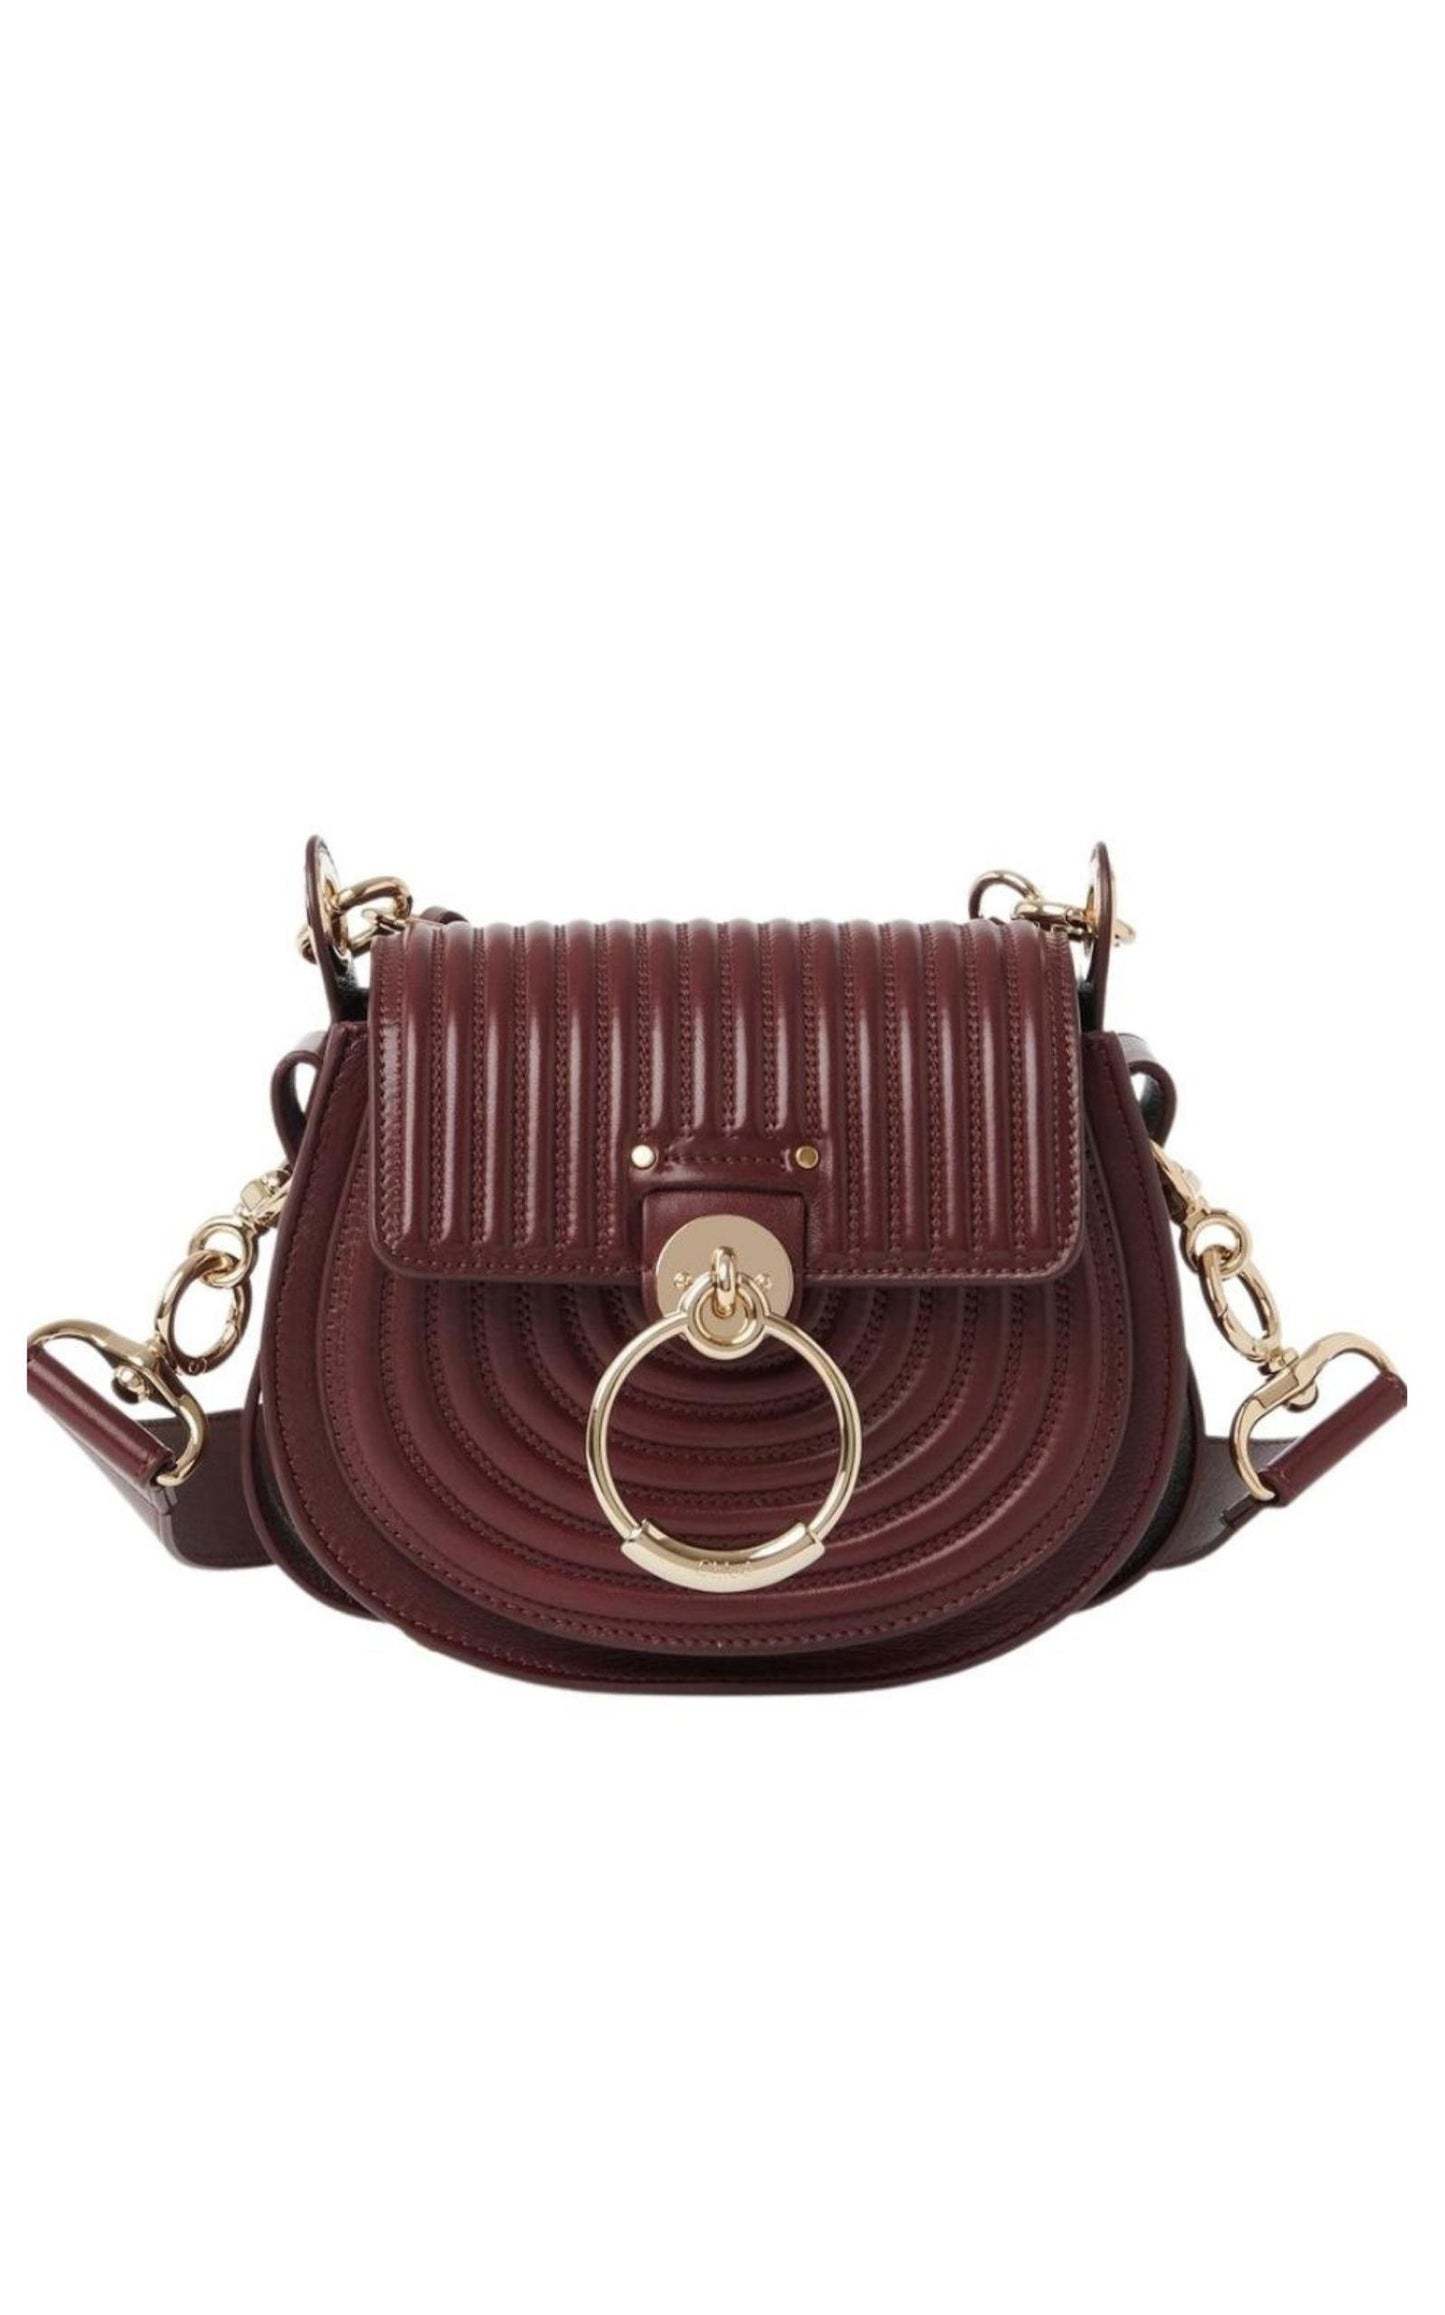 Chloé Black Leather Small Tess Crossbody Bag, Best Price and Reviews